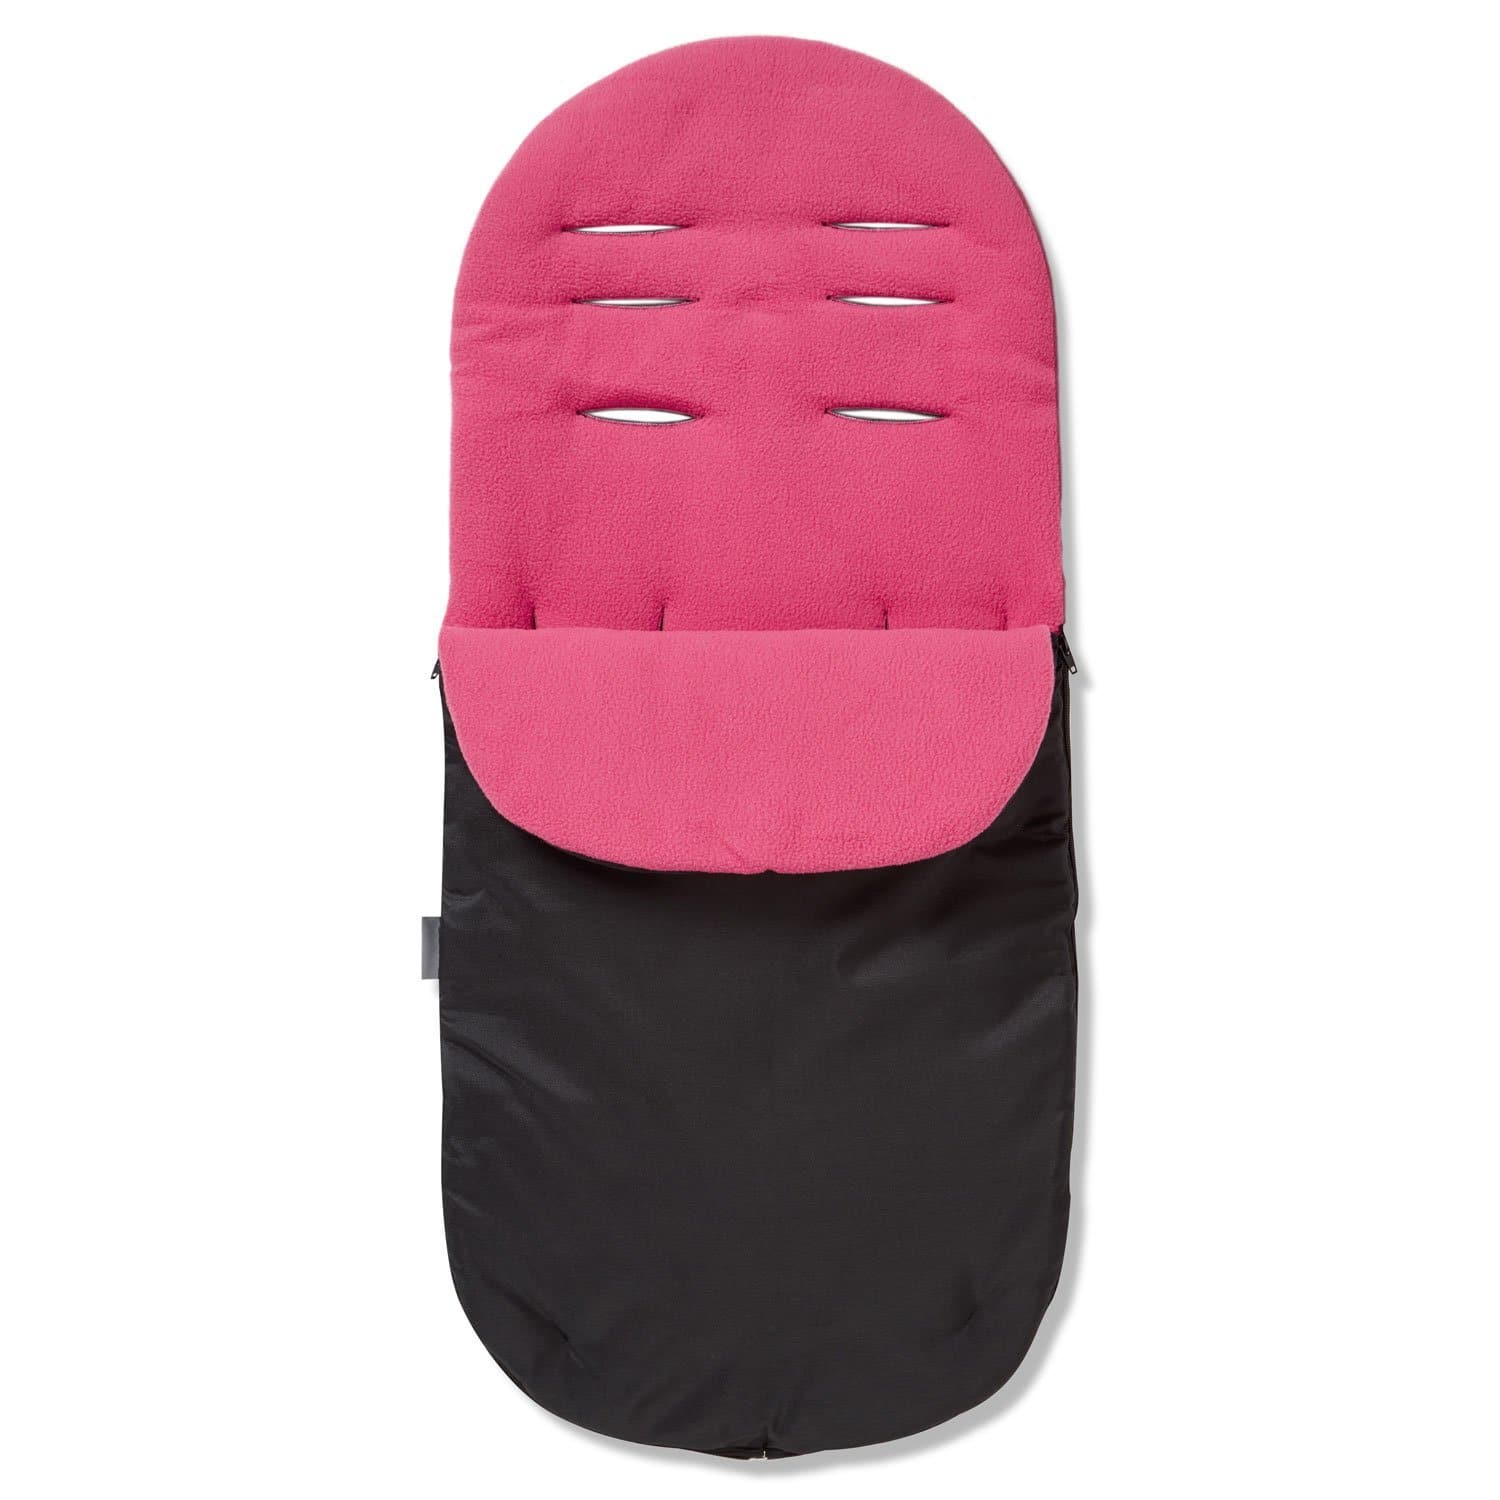 Footmuff / Cosy Toes Compatible with Bebe Confort - Dark Pink / Fits All Models | For Your Little One